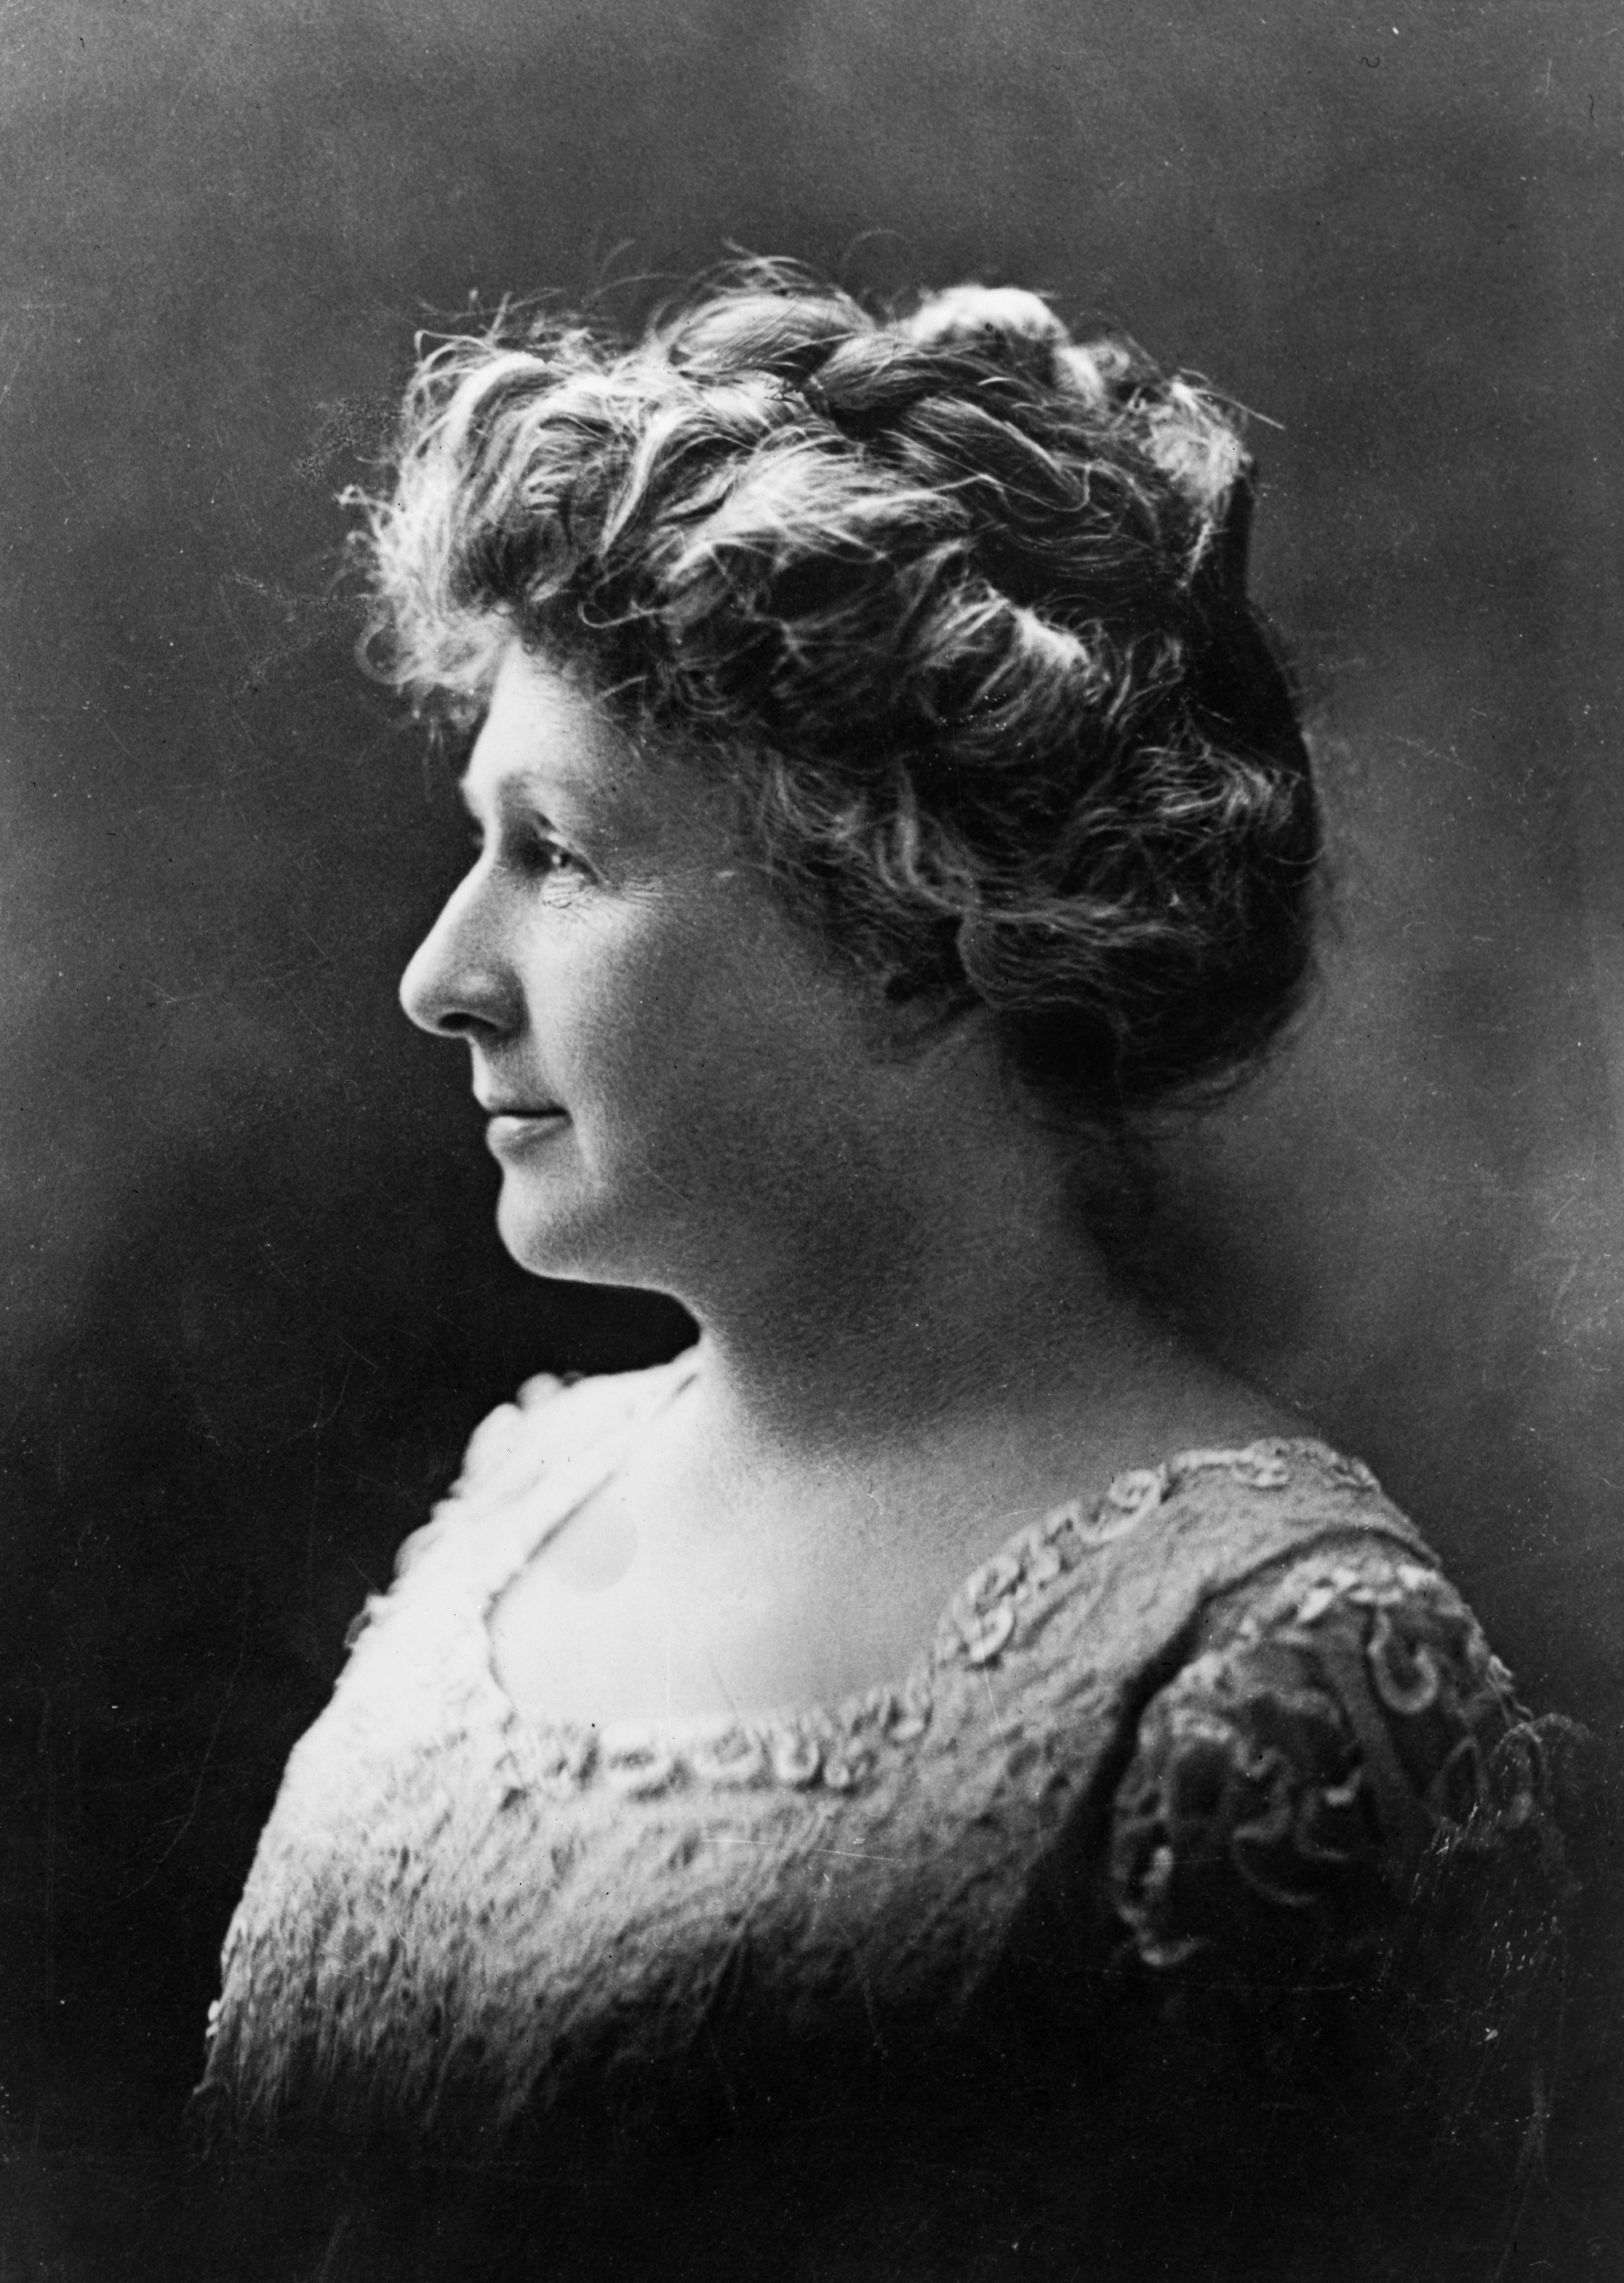 Black and white photograph of Annie Jump cannon, a deaf astronomer